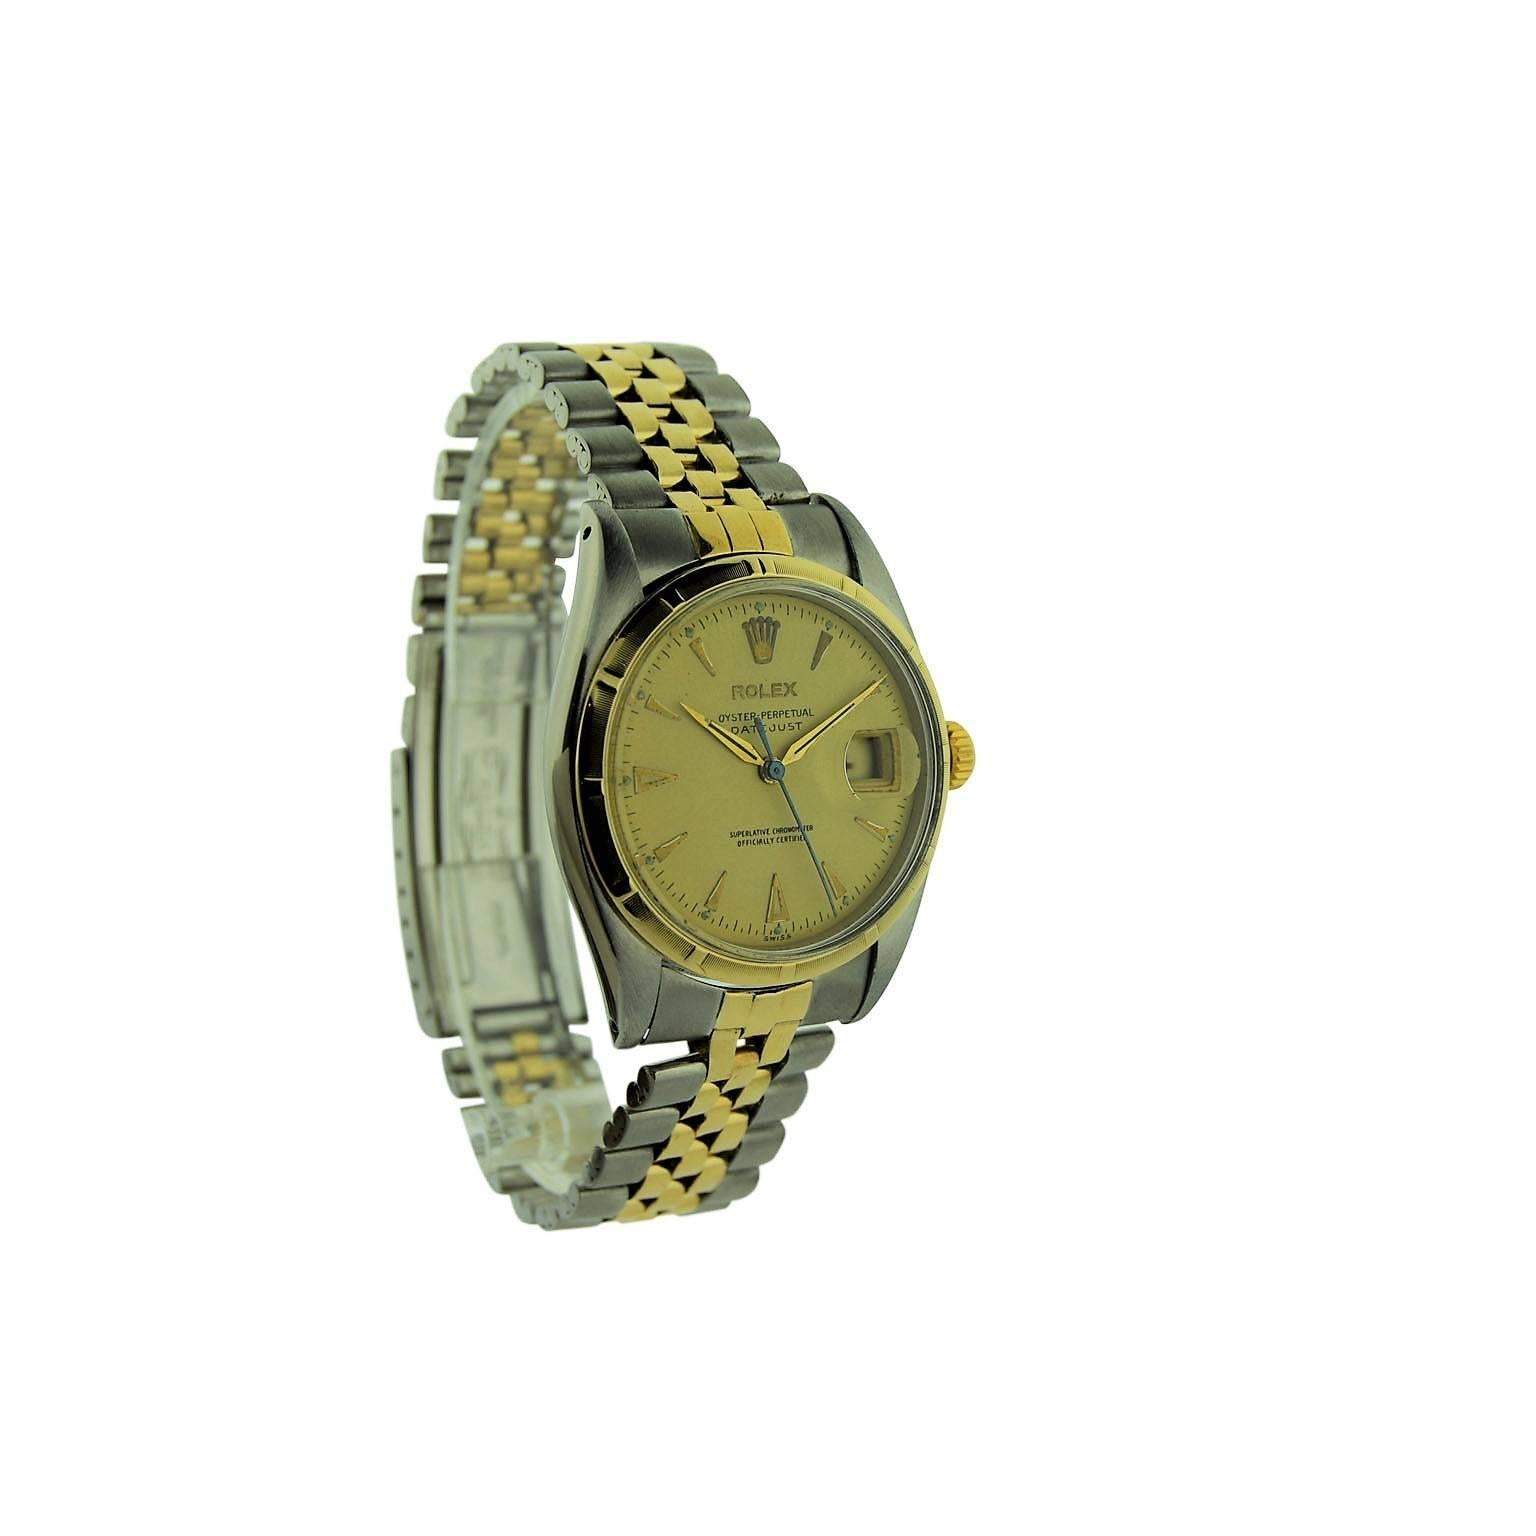 FACTORY / HOUSE: Rolex Watch Company
STYLE / REFERENCE: Datejust / 6305
METAL / MATERIAL: Stainless Steel / 18Kt. Yellow Gold
DIMENSIONS:  44mm  X  36mm
CIRCA: 1953 / 1954
MOVEMENT / CALIBER: Perpetual Winding /  18 Jewels / Cal. 745
DIAL / HANDS: